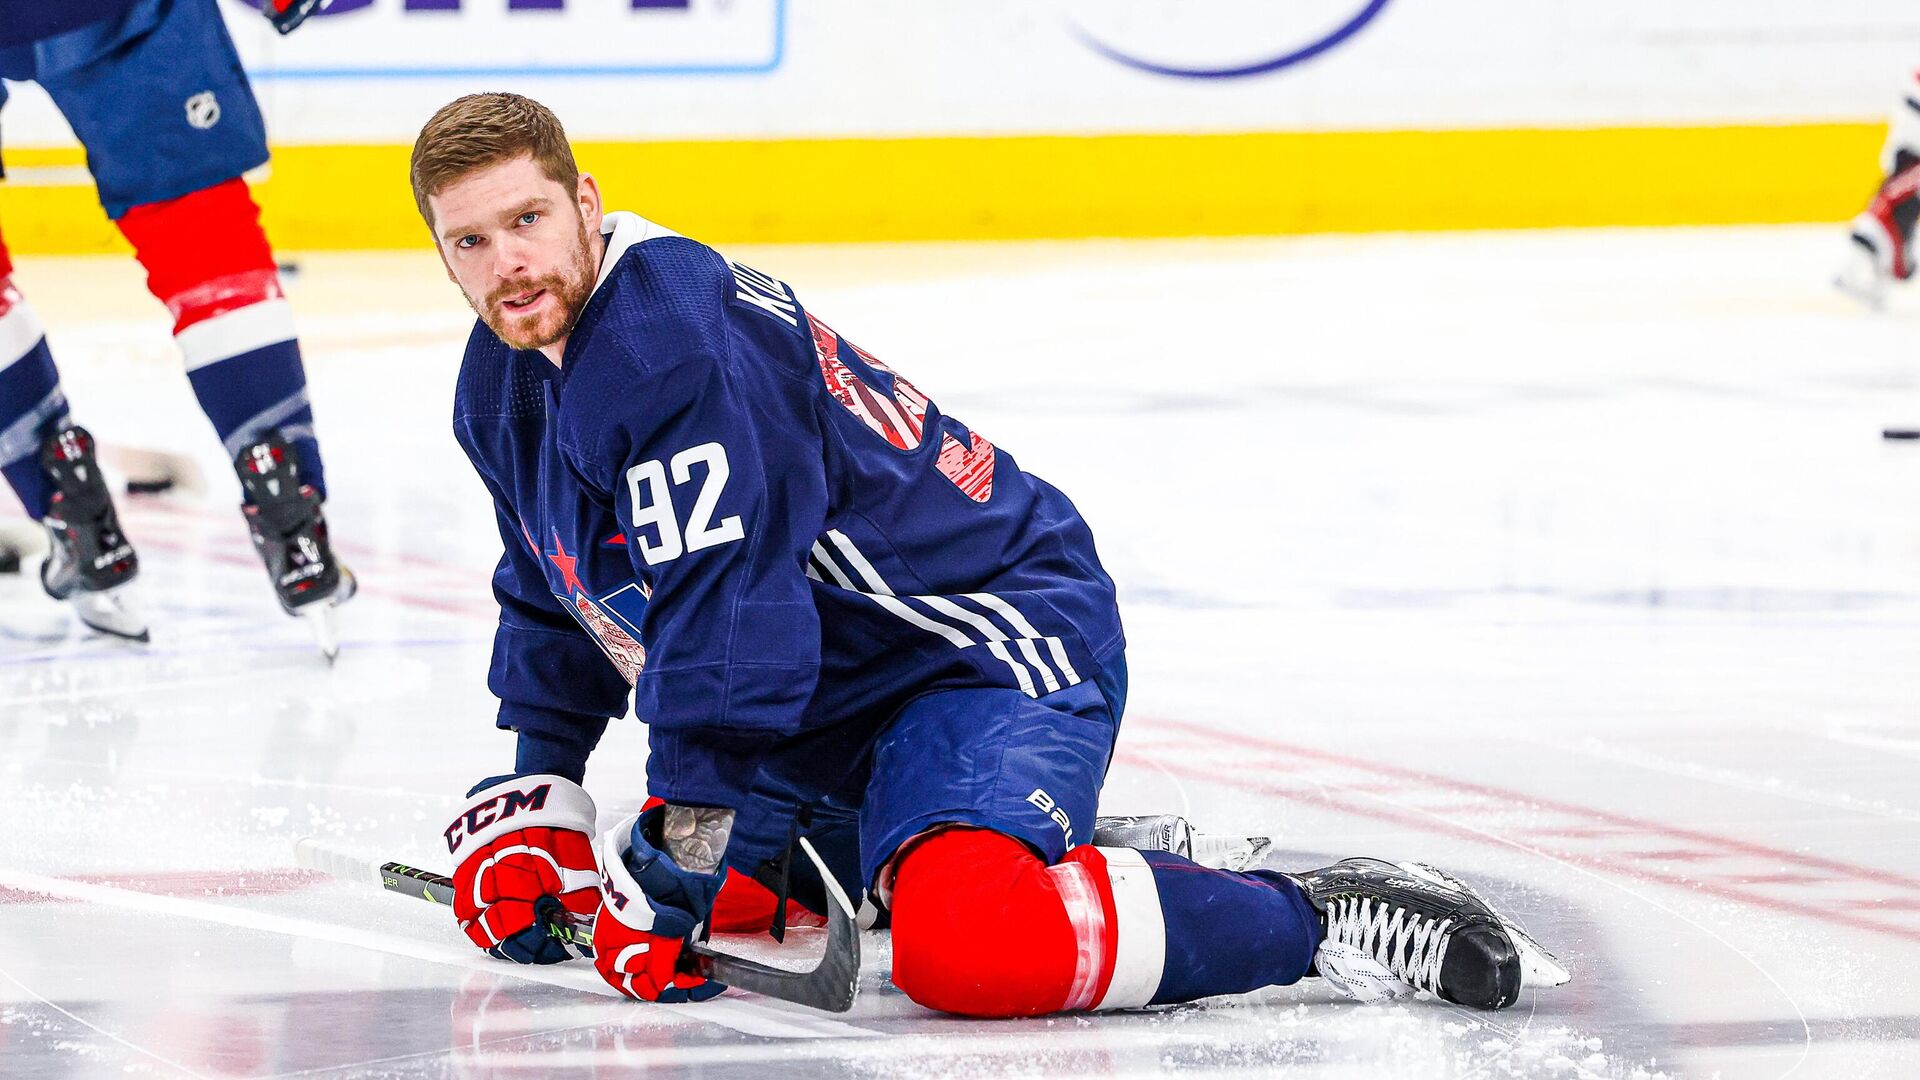 Russian forward played his final NHL season with an injury